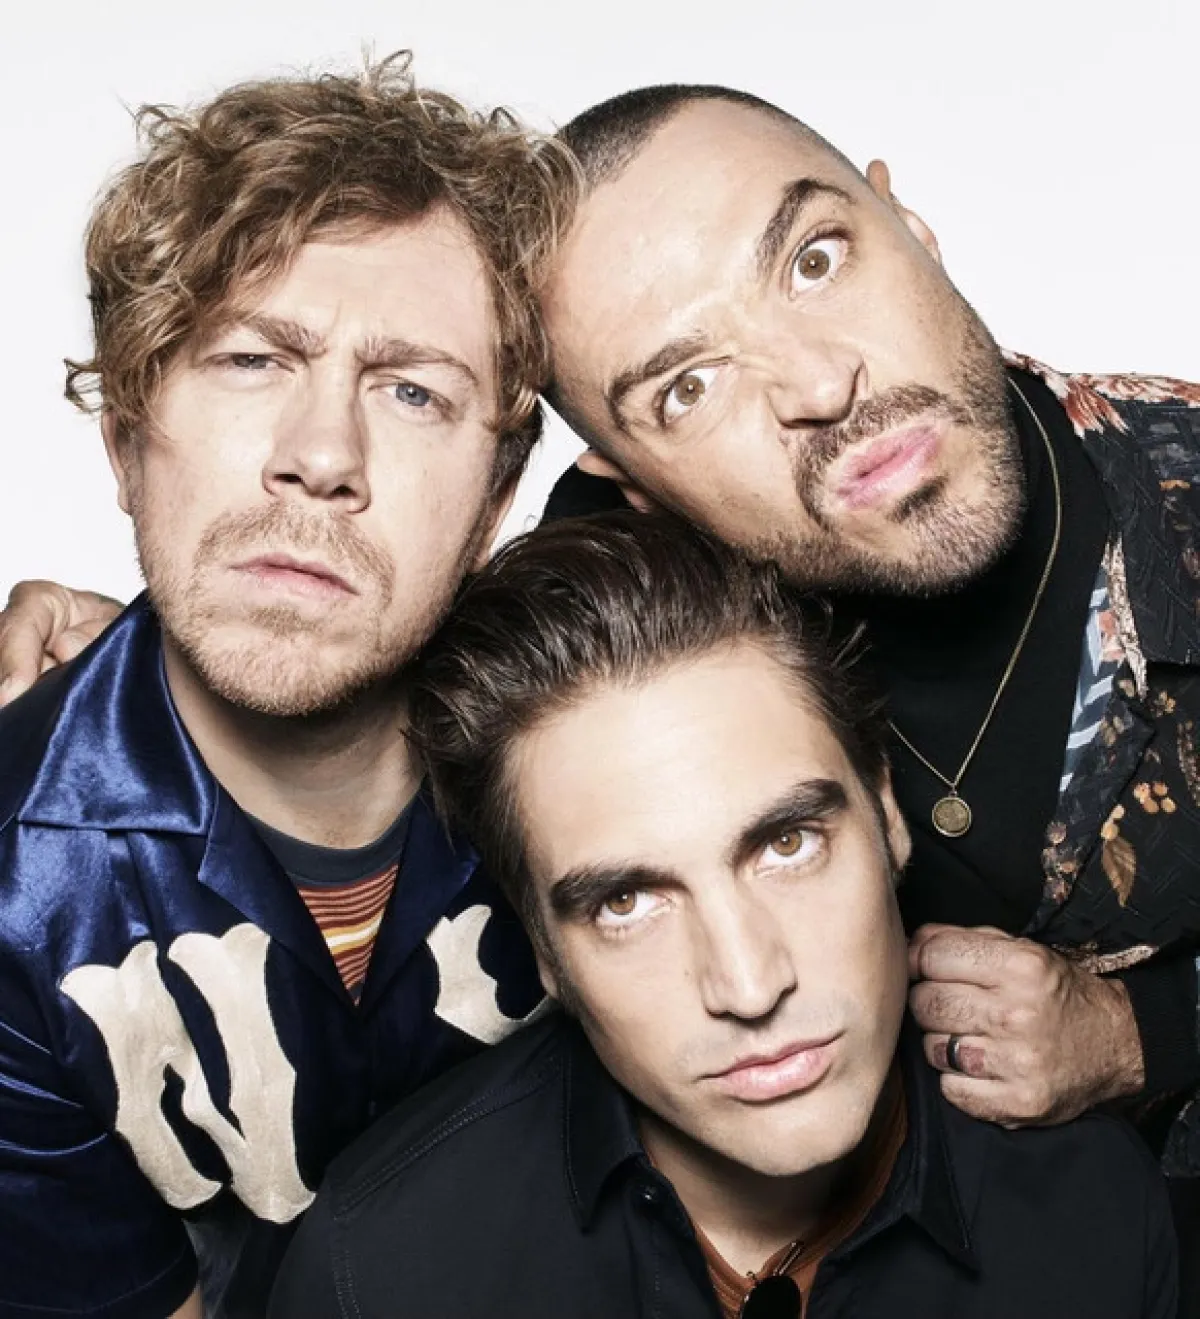 Busted at Vivary Park Tickets